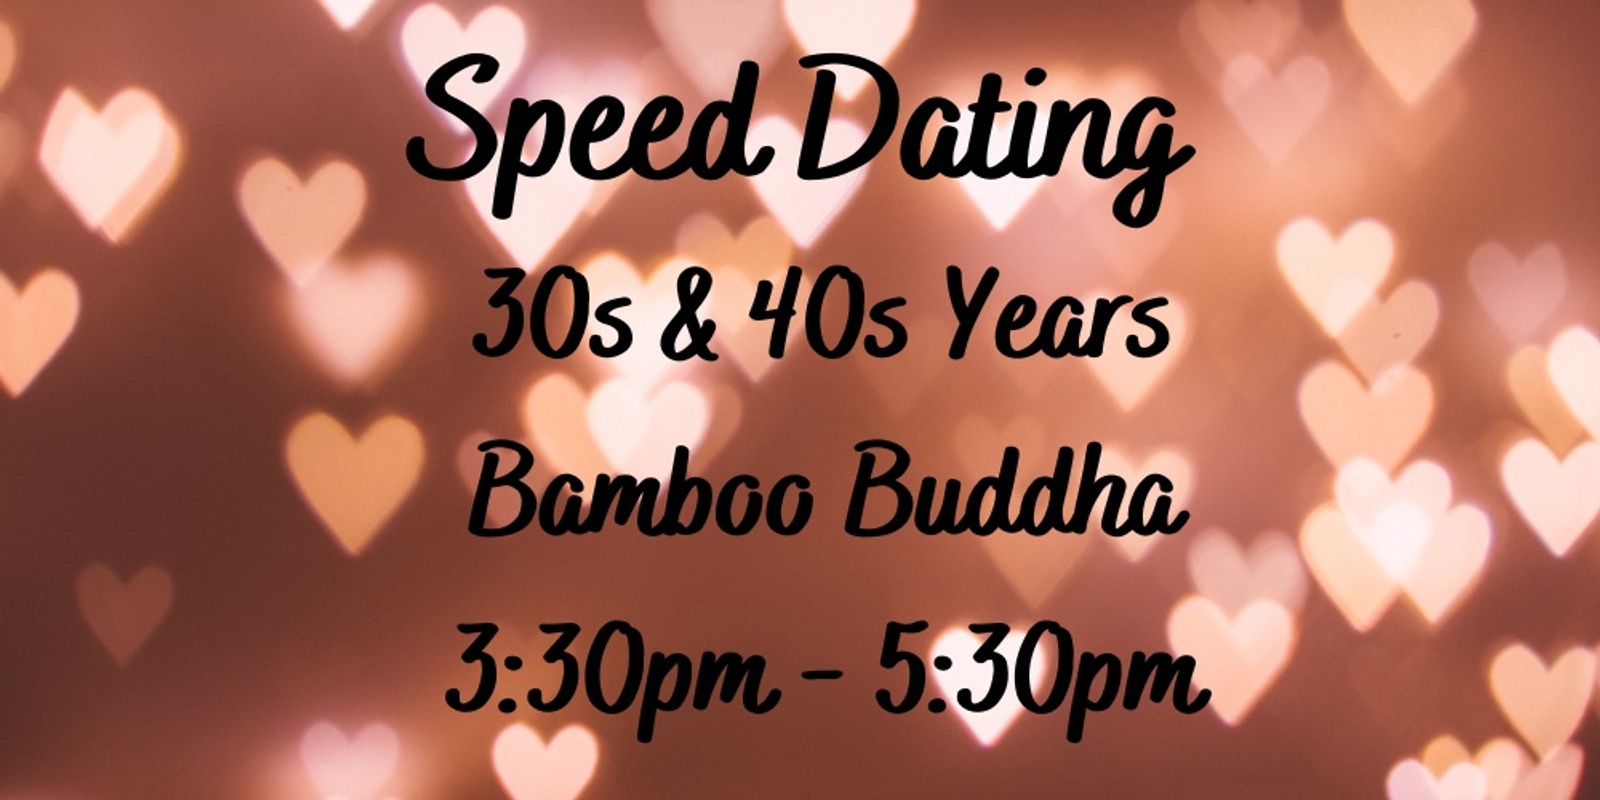 30s & 40s years Speed Dating 